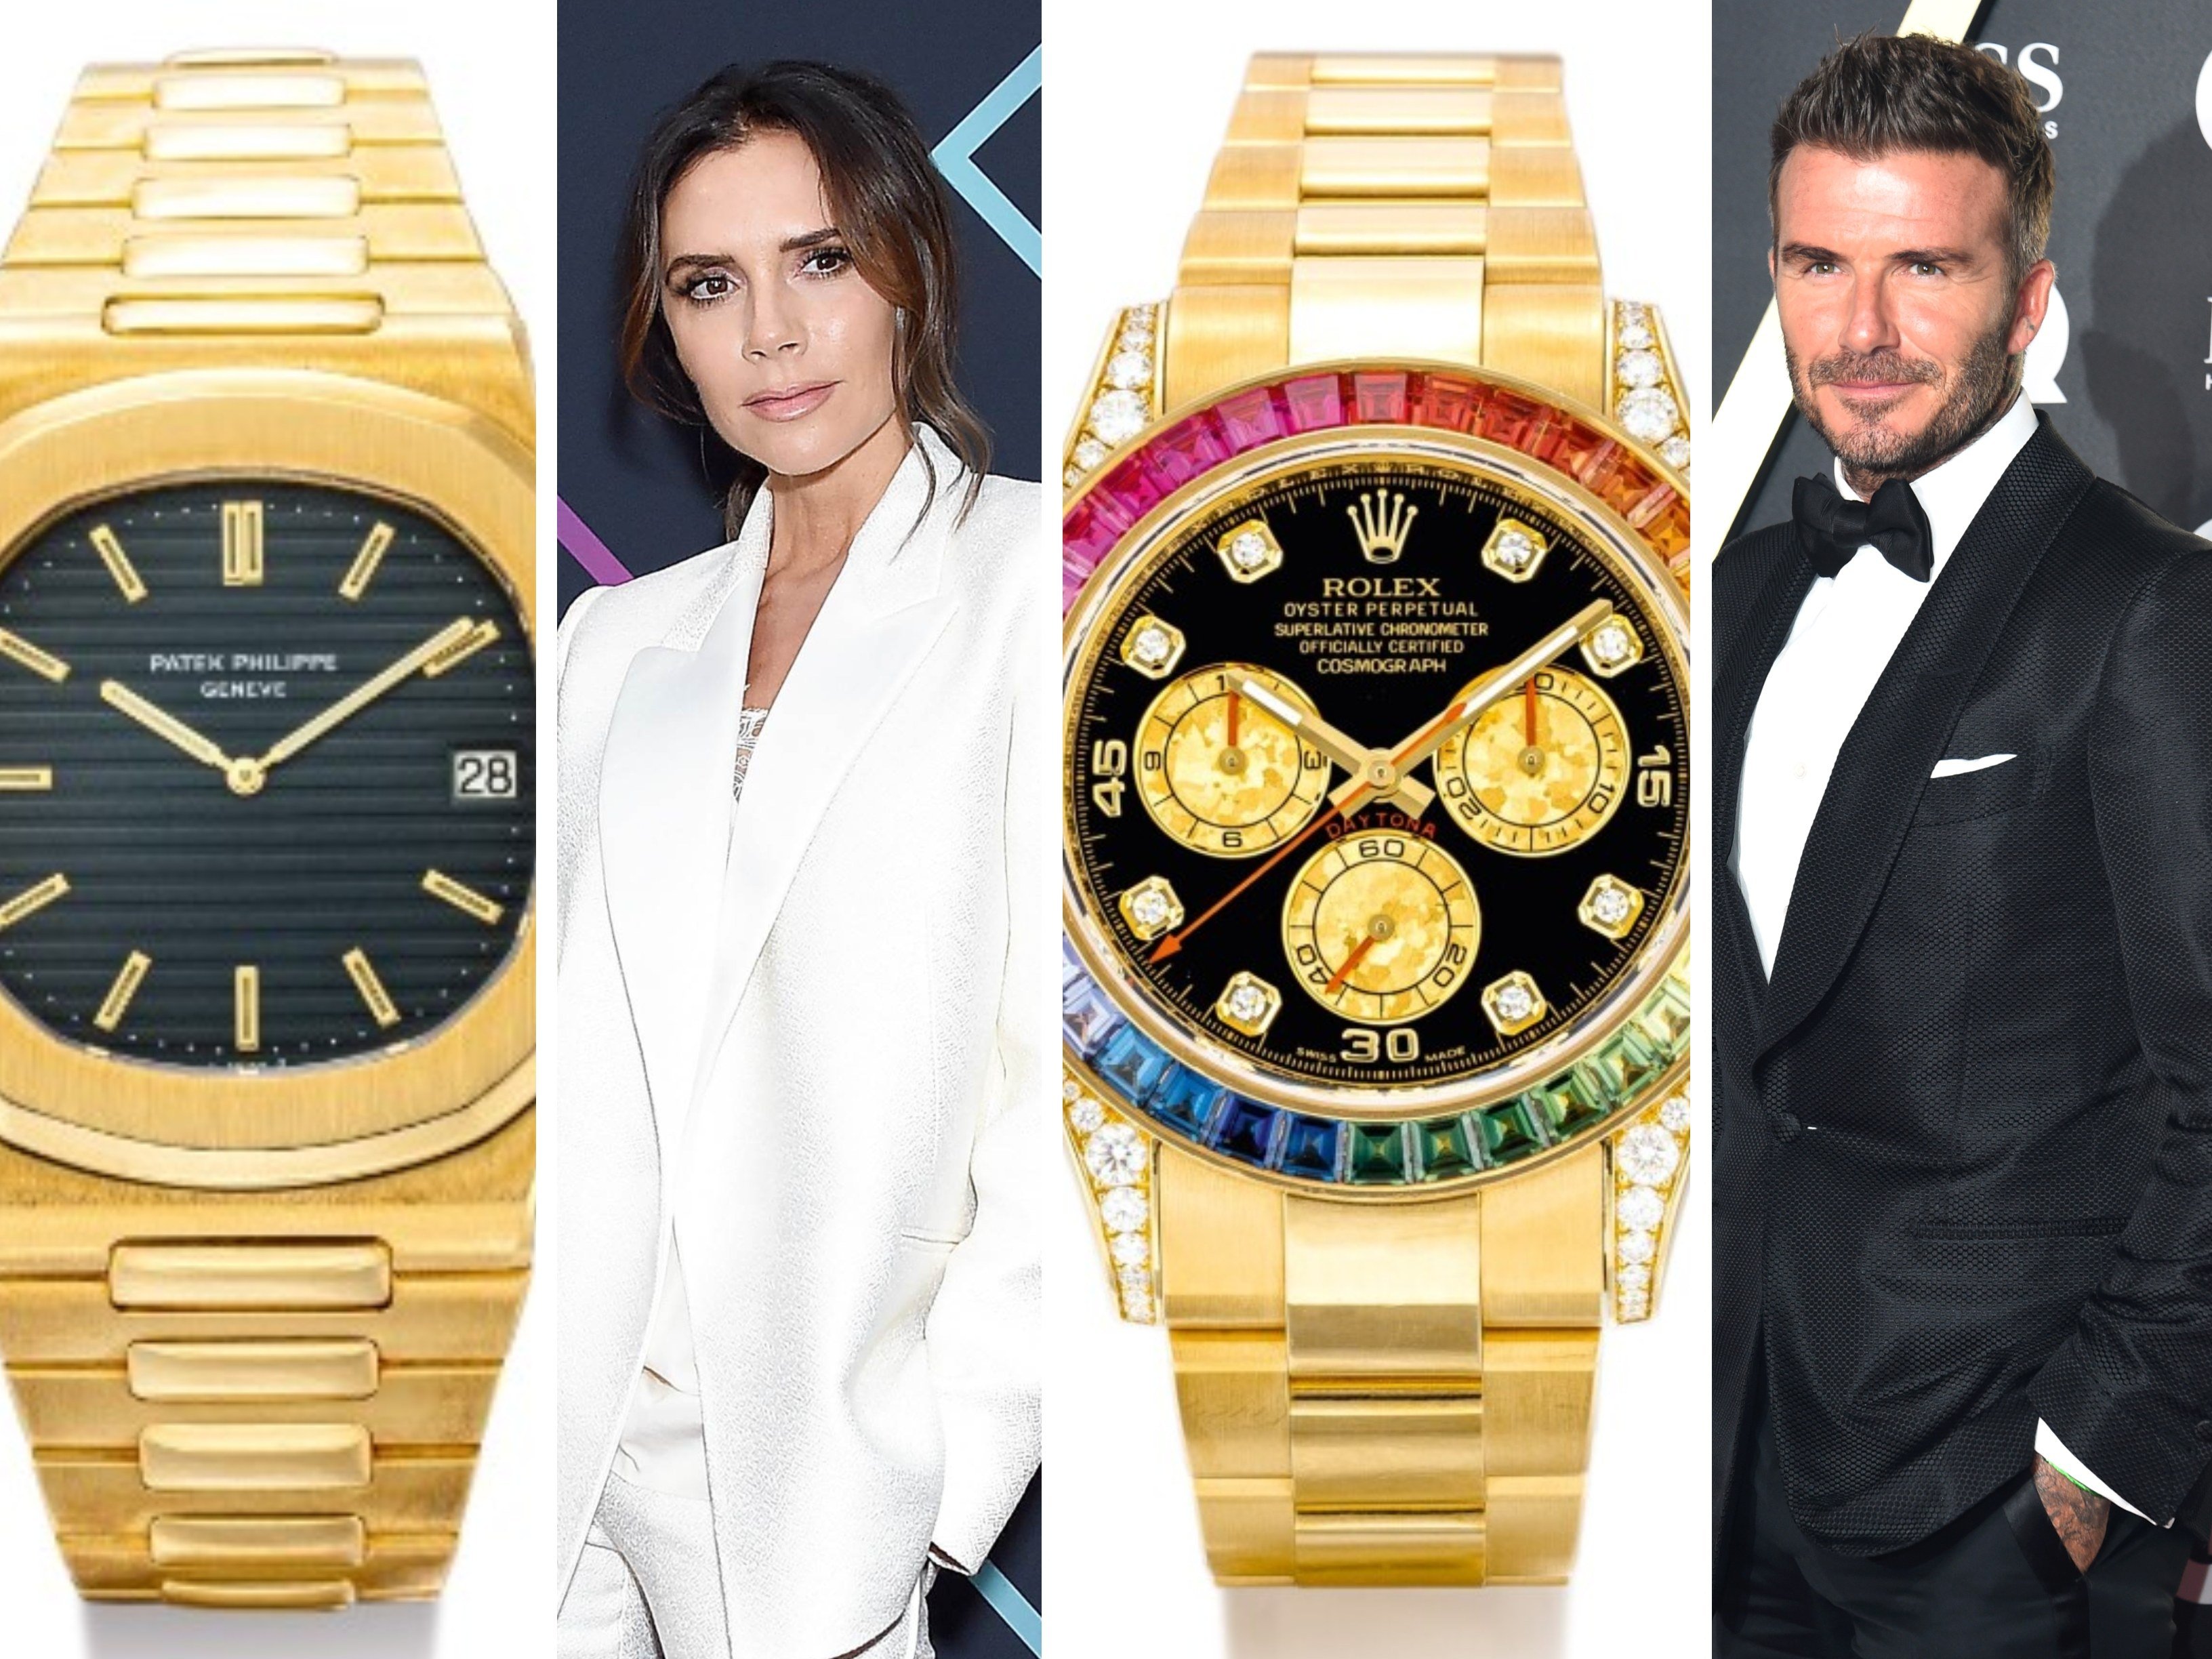 The Beckhams’ 5 most expensive watches, ranked: from David’s multi-brand collection to Victoria’s vintage models. Photos: Patek Philippe/AFP/Sotheby’s/DPA